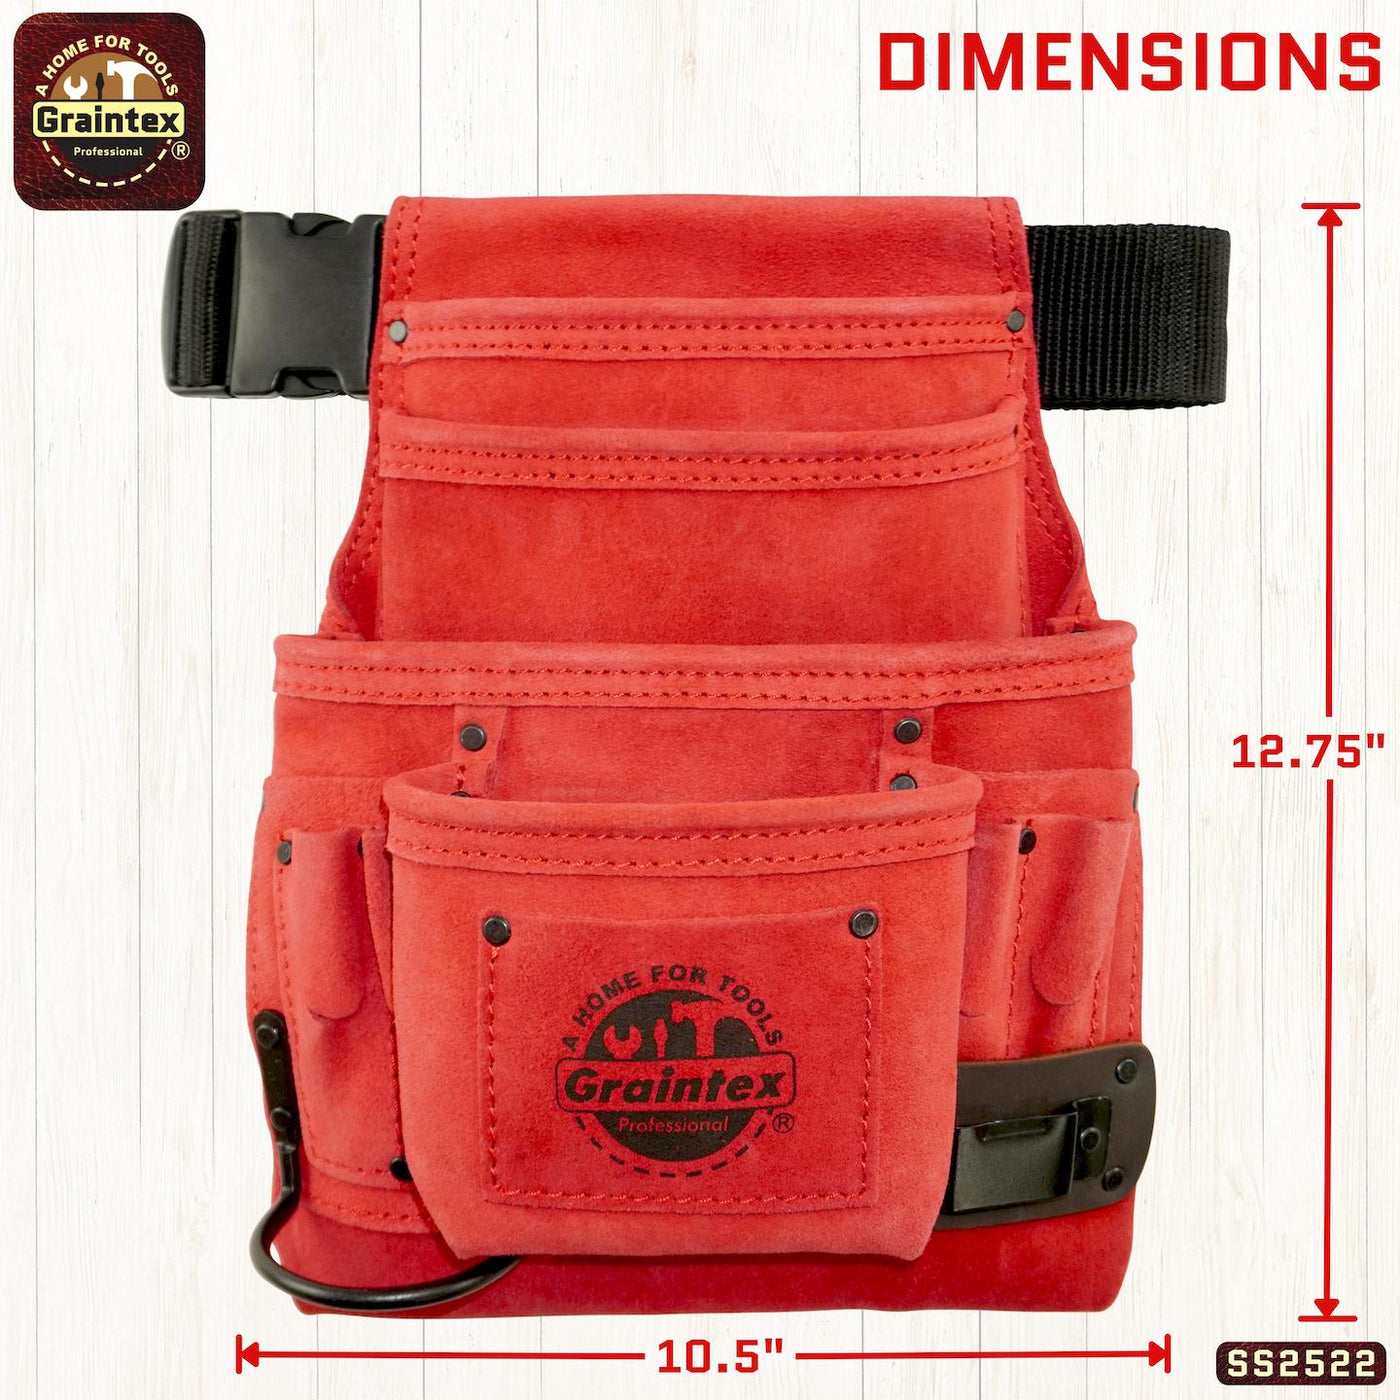 SS2522 :: 10 Pocket Nail & Tool Pouch Red Color Suede Leather with Belt